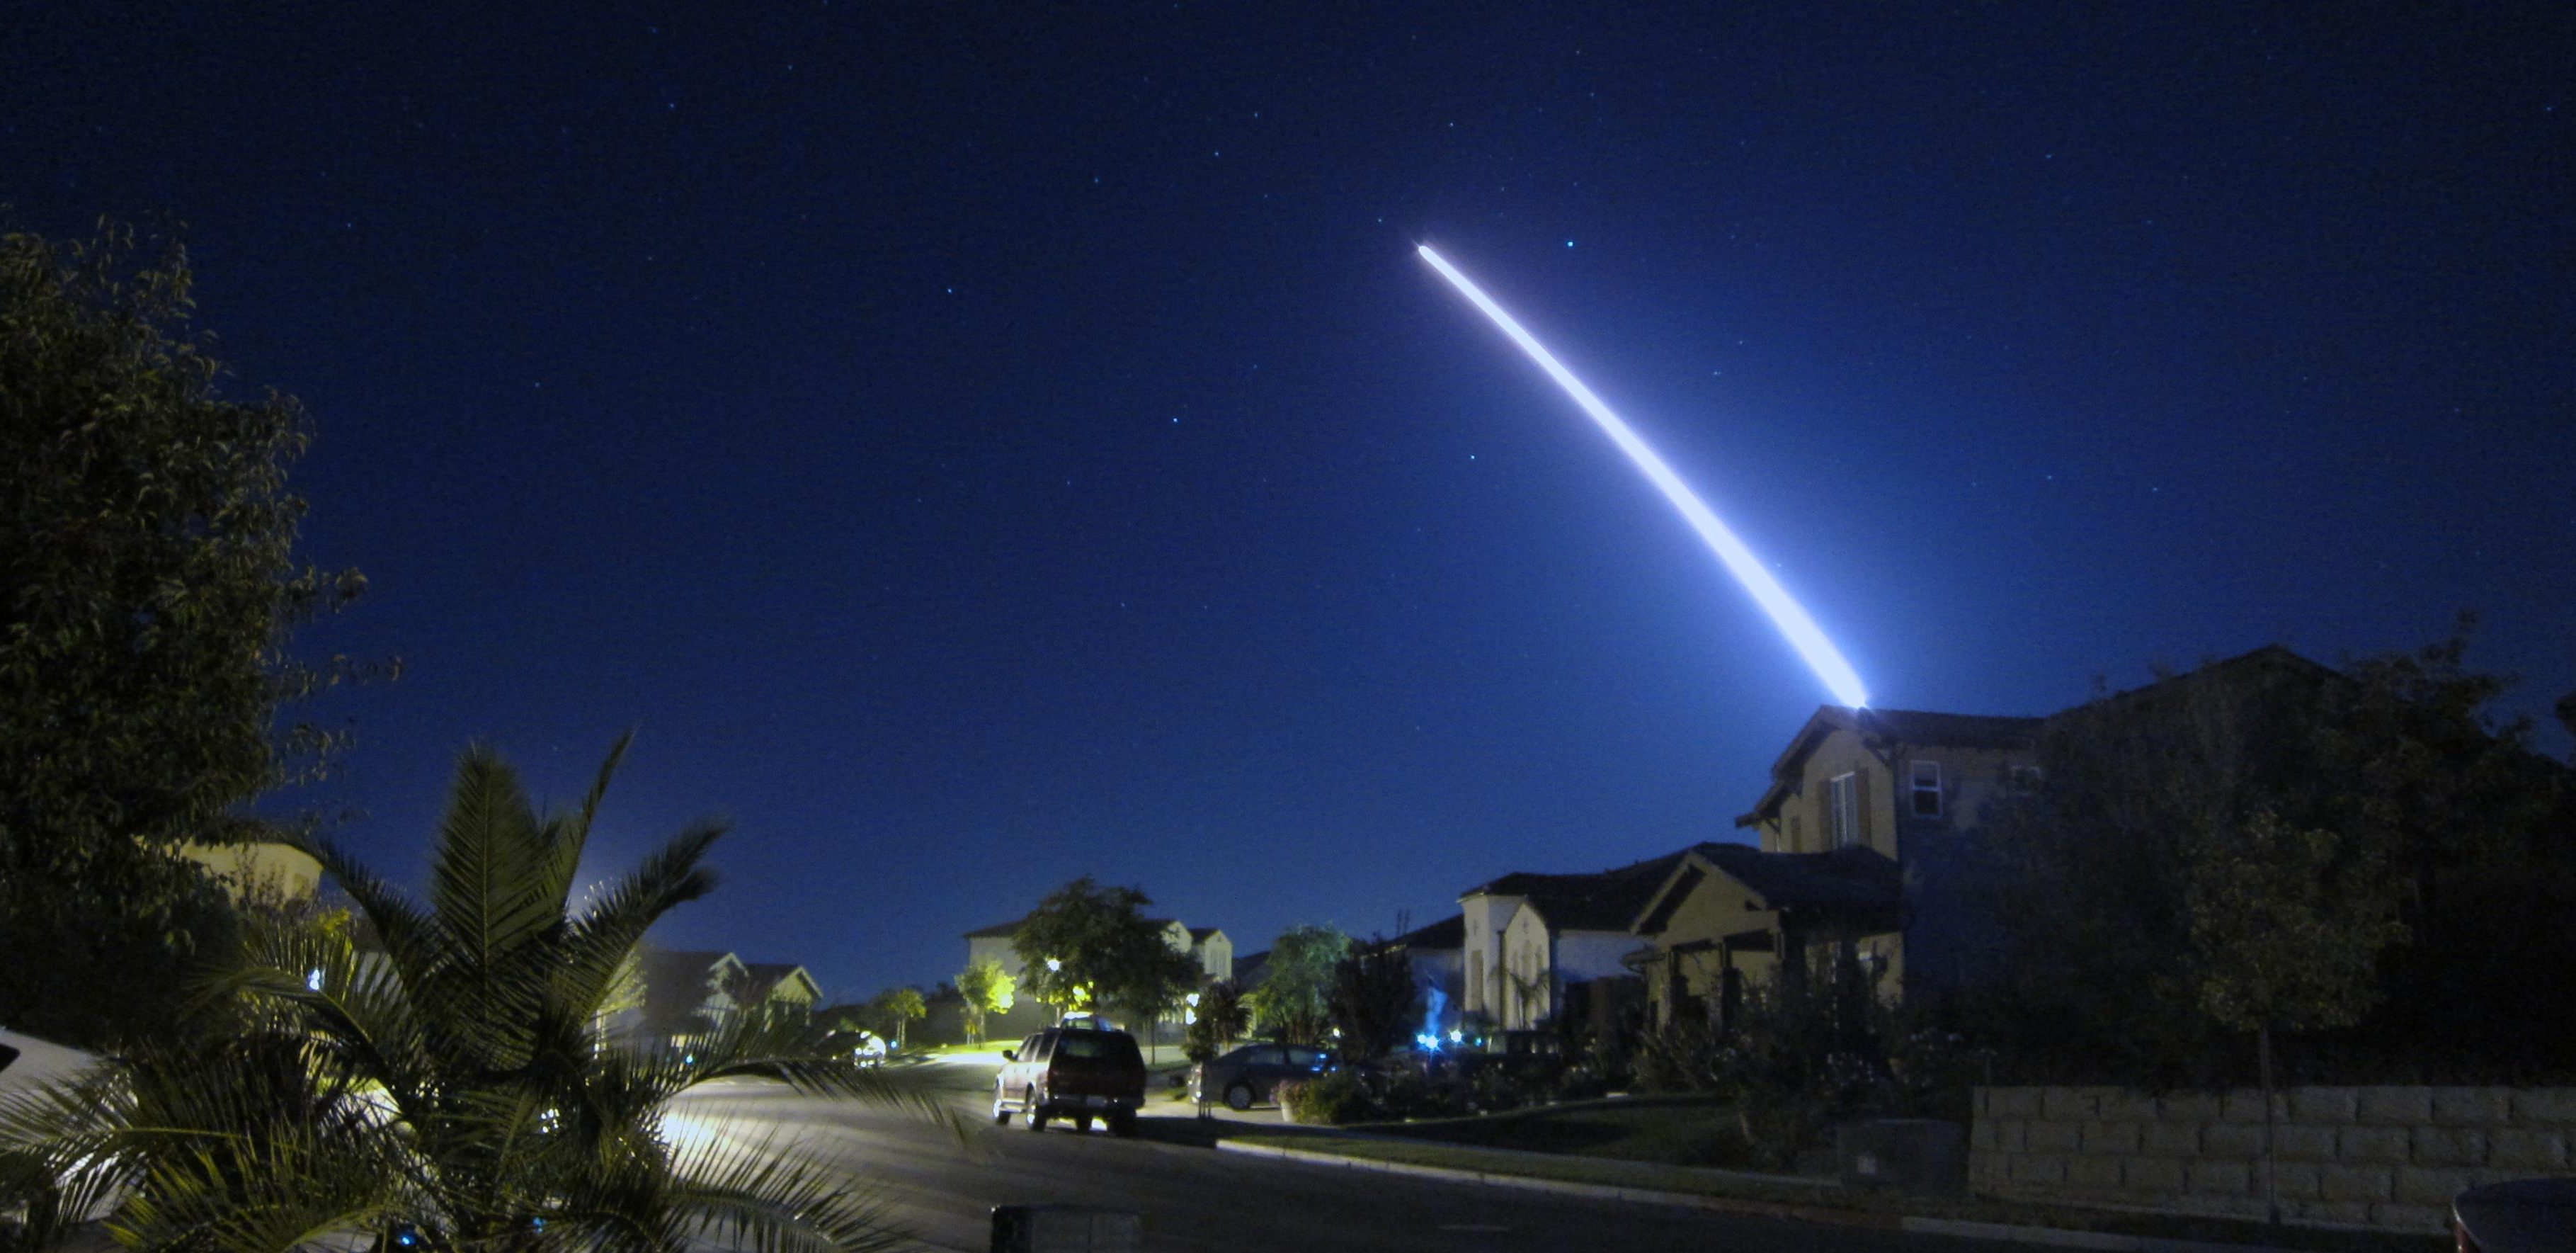 An operational test launch of an unarmed Minuteman III intercontinental ballistic missile from Vandenberg Air Force Base, Calif., is seen from nearby Lompoc, Calif., Sept. 26, 2013. The ICBM safely launched and traveled the approximately 4,200 nautical miles to its target in the Marshall Islands. Photo credit: Lt. Col. Andy Wulfestieg, U.S. Air Force.